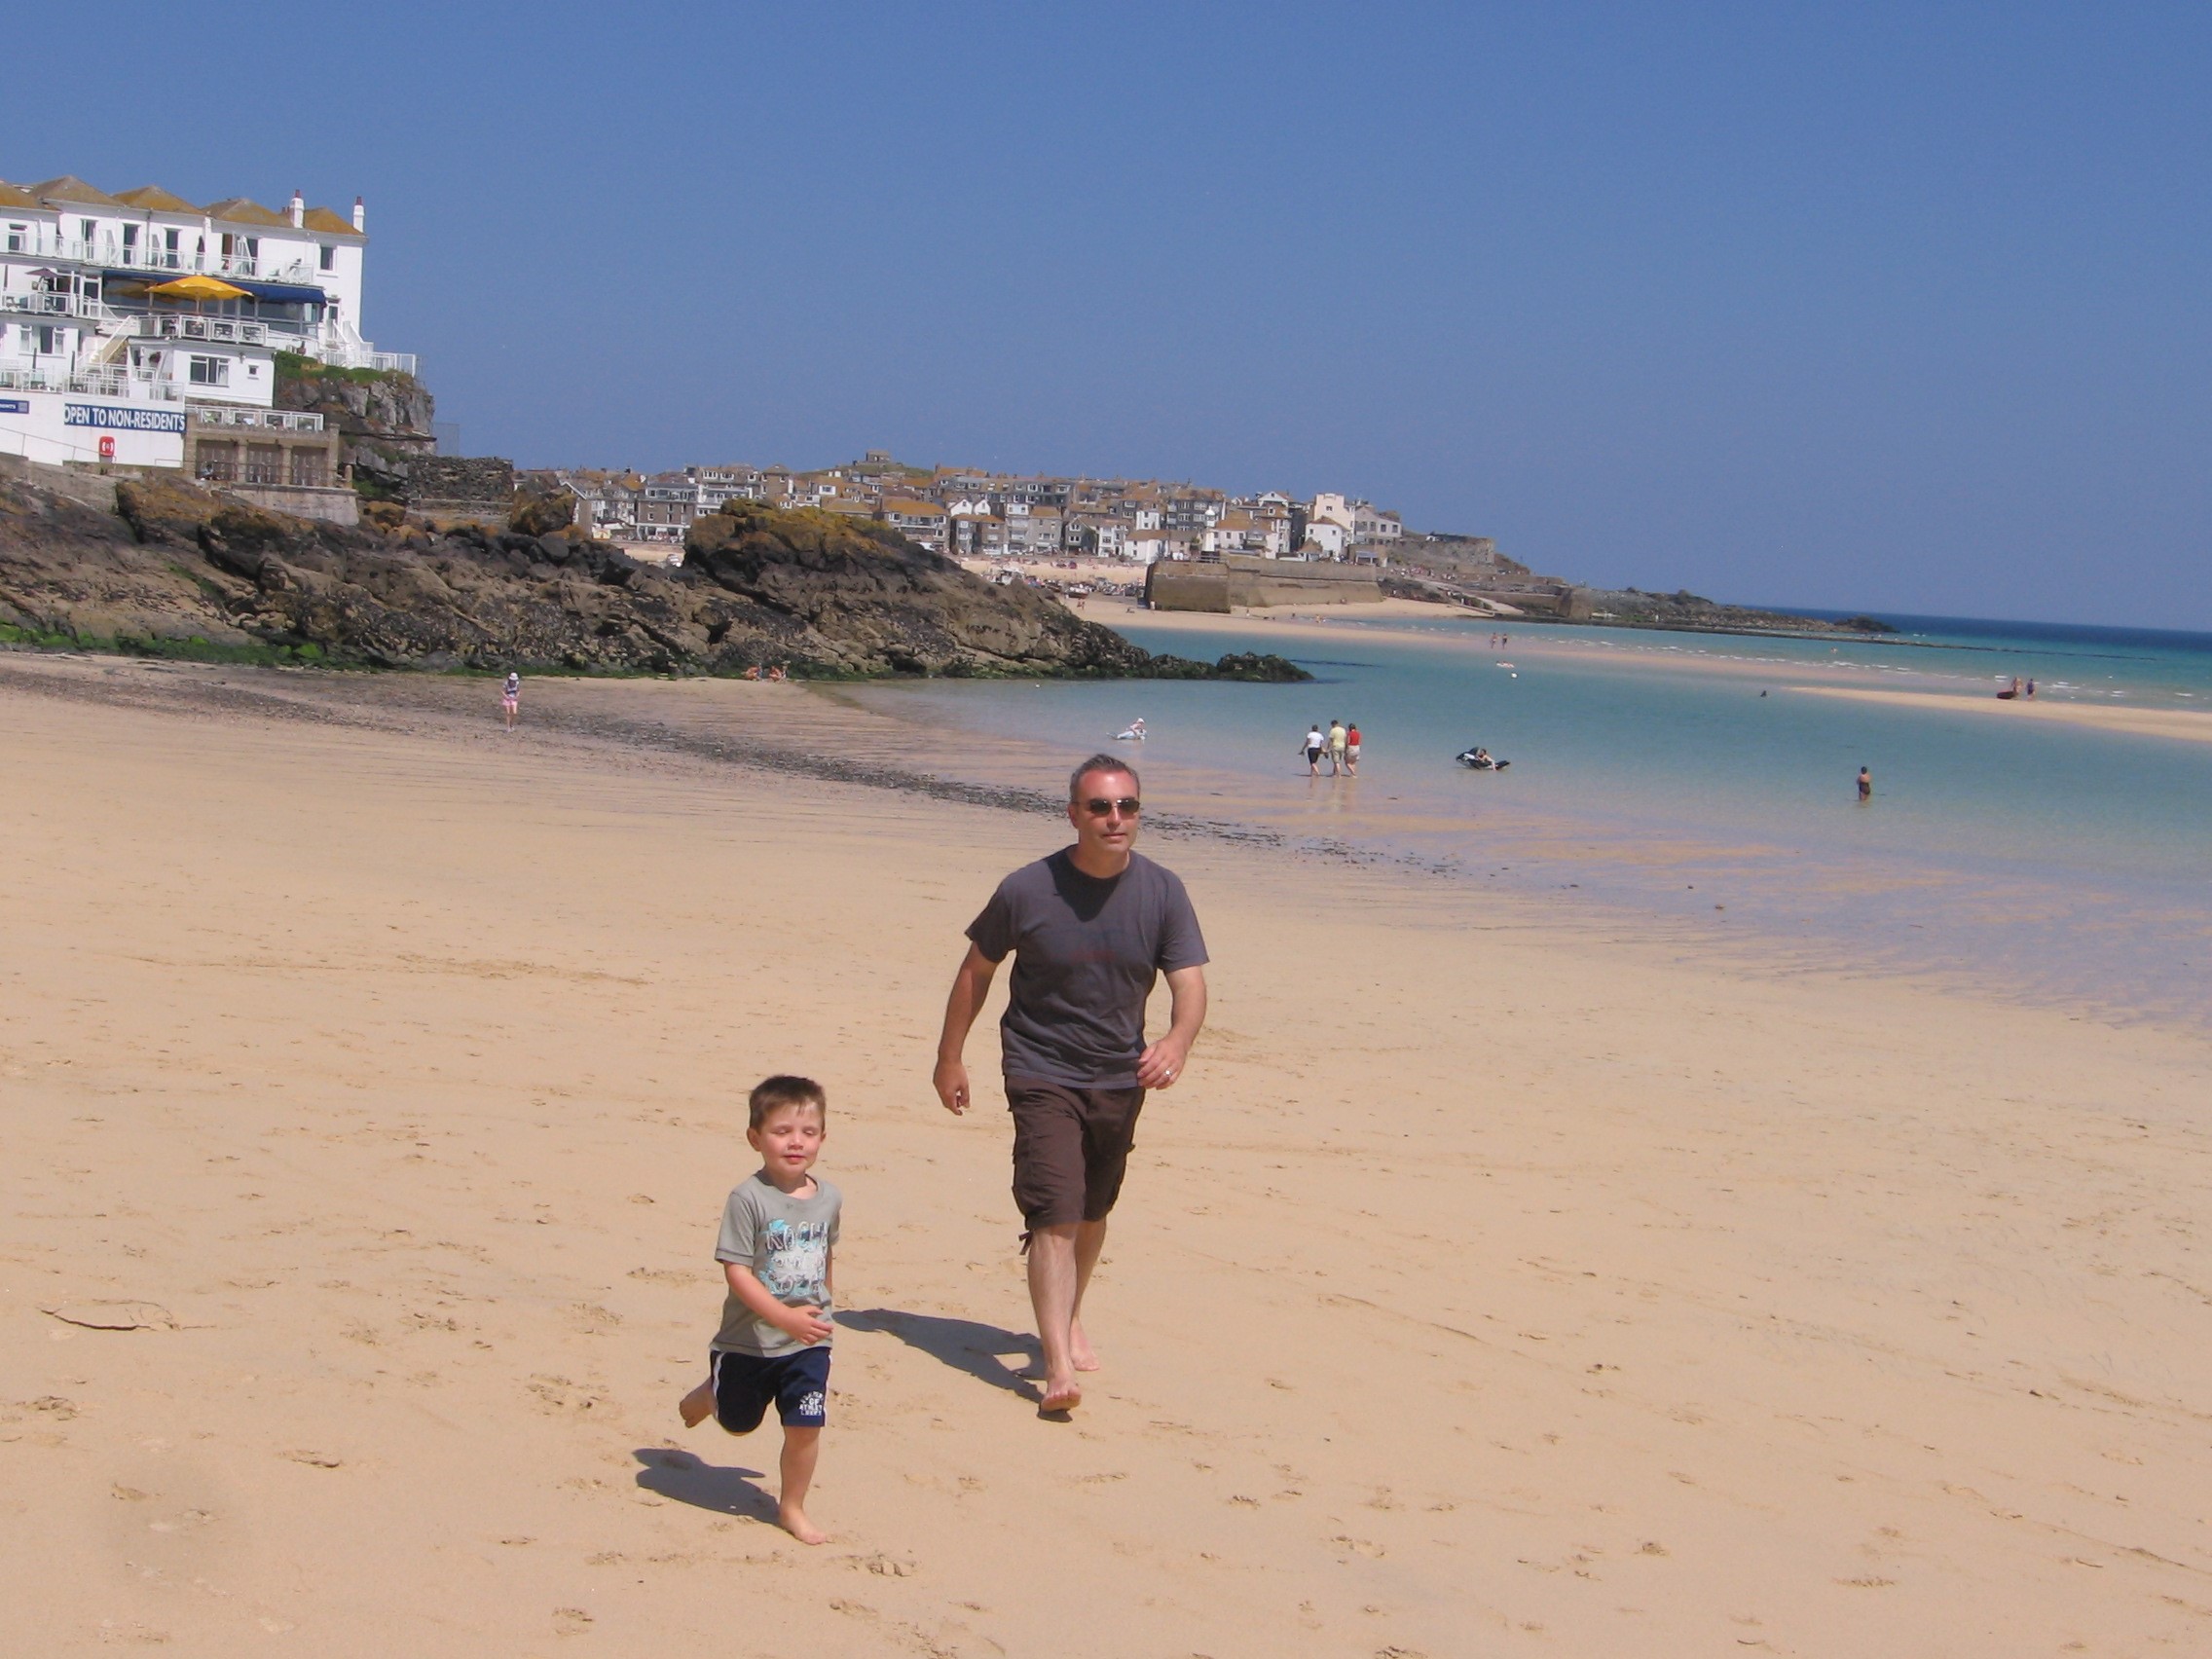 Dune Jewelry favorite family getaways St. Ives England from Kate C.